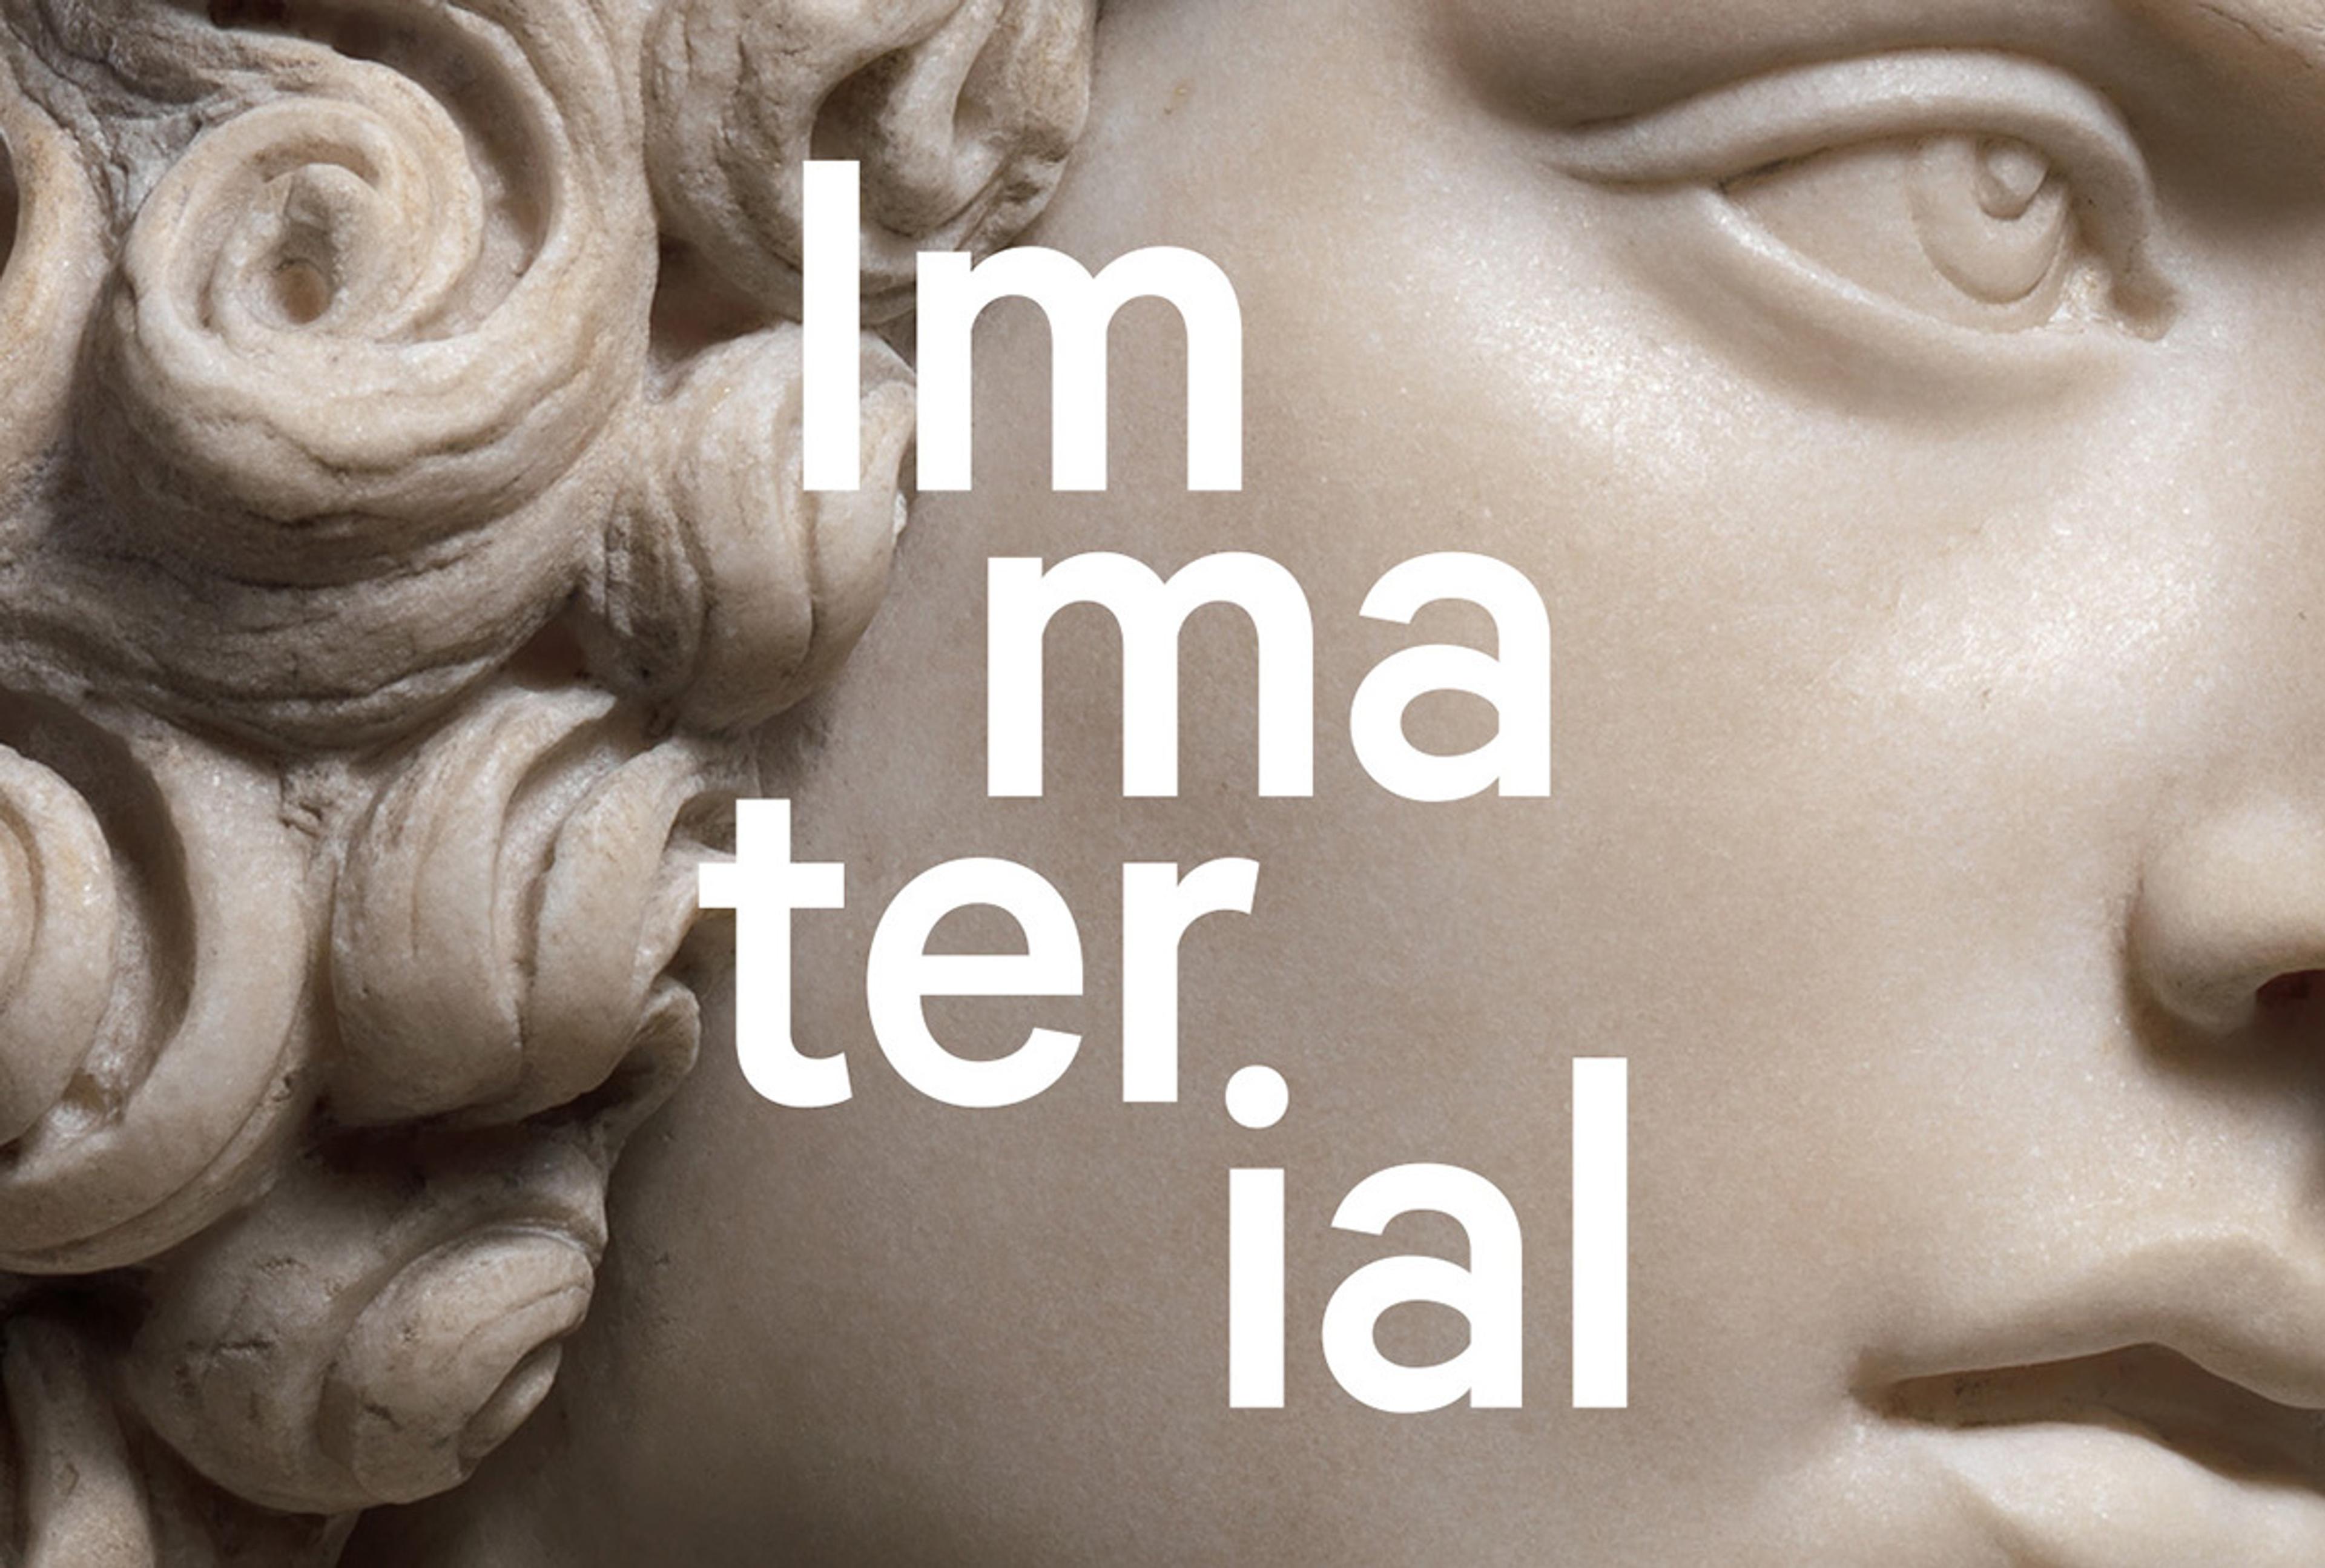 A close up of a marble stone sculpture of a man with a white text overlay that says "Immaterial"